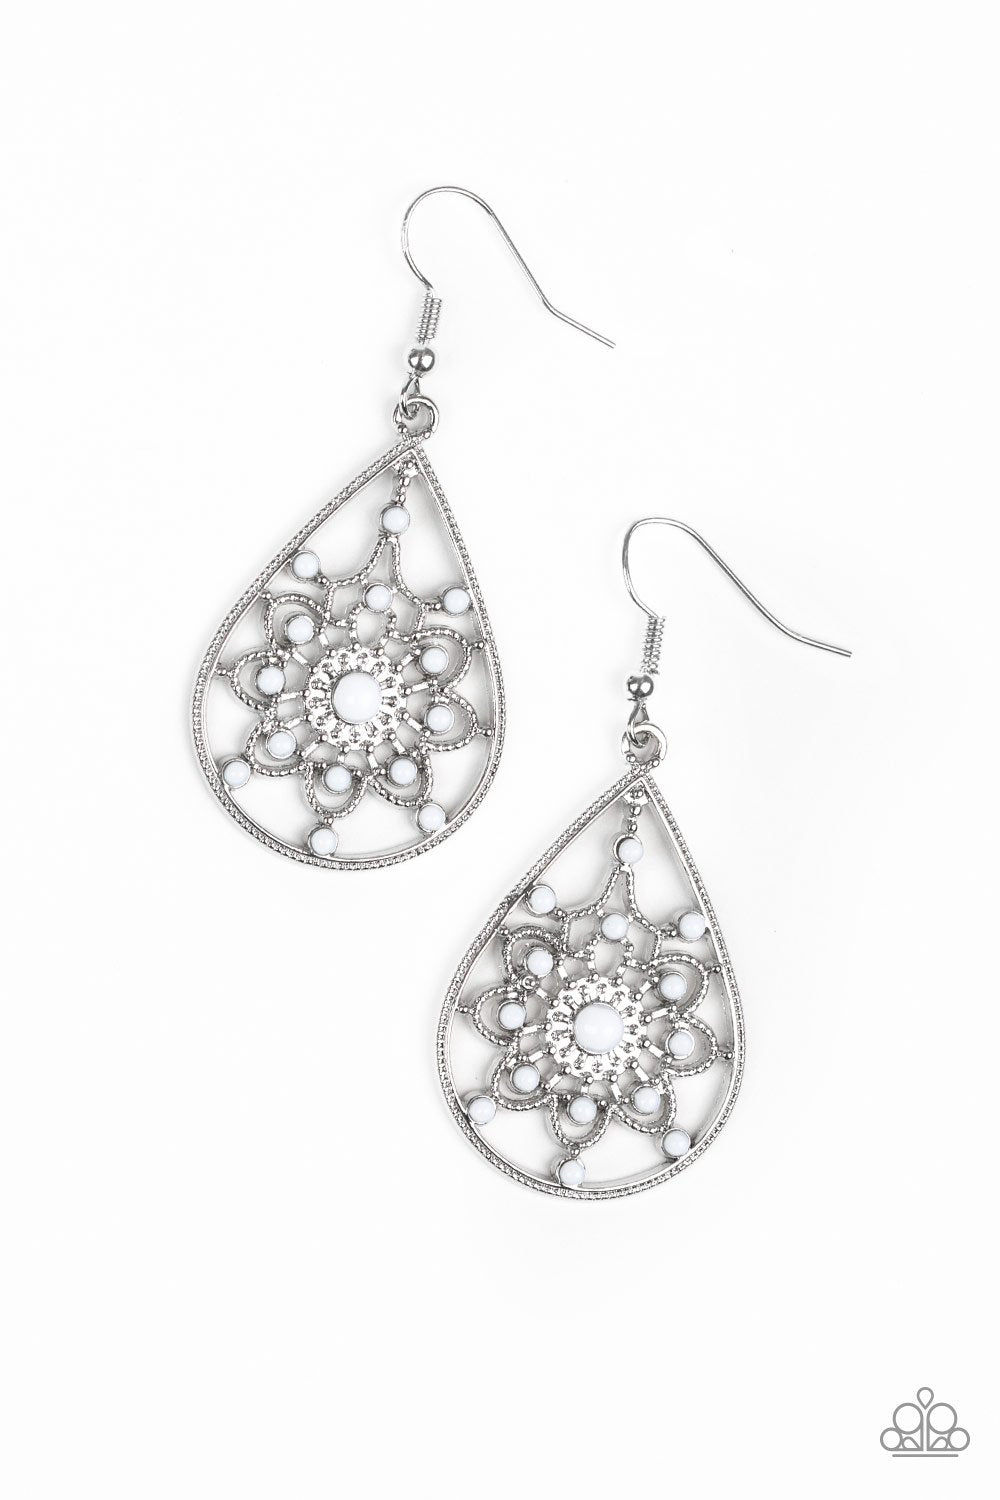 A Flair For Fabulous White Earrings - Paparazzi Accessories-CarasShop.com - $5 Jewelry by Cara Jewels